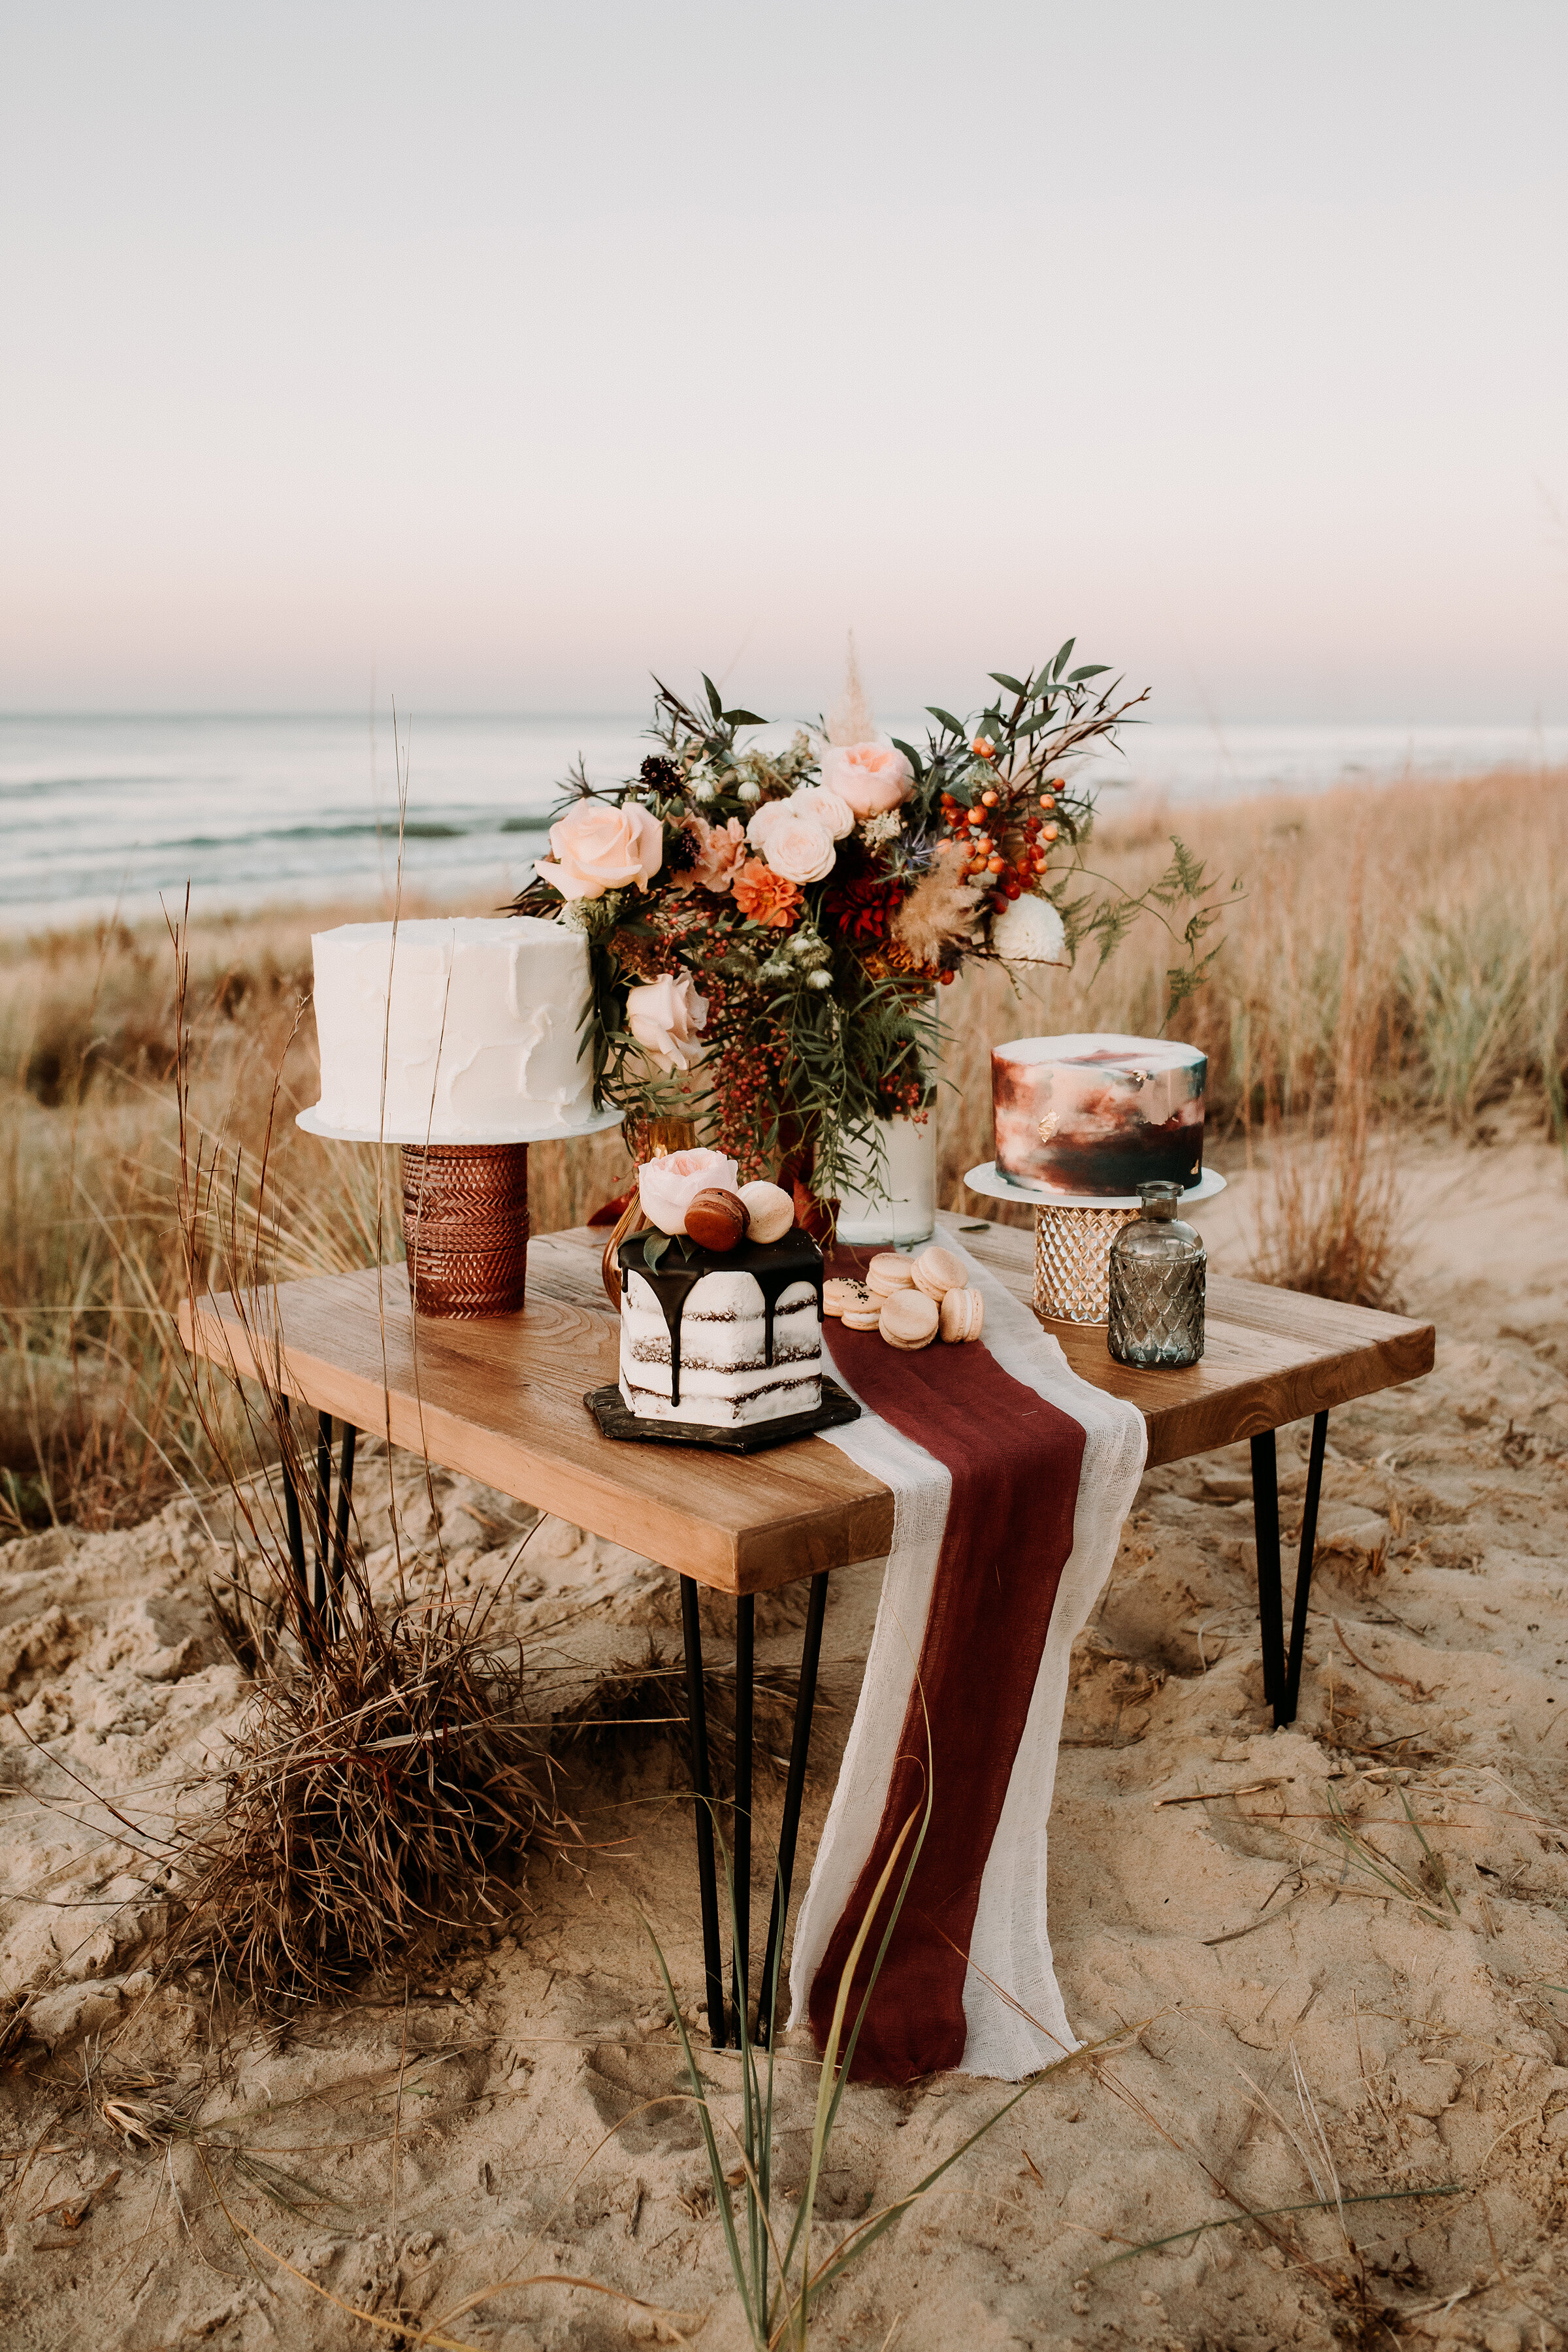  A trio of cakes and boho table decor for this west coast-inspired elopement styled shoot on the shores of Lake Michigan in Indiana Dunes State Park. adventurous brides planning boho weddings in the midwest cake display table boho wedding beach elope